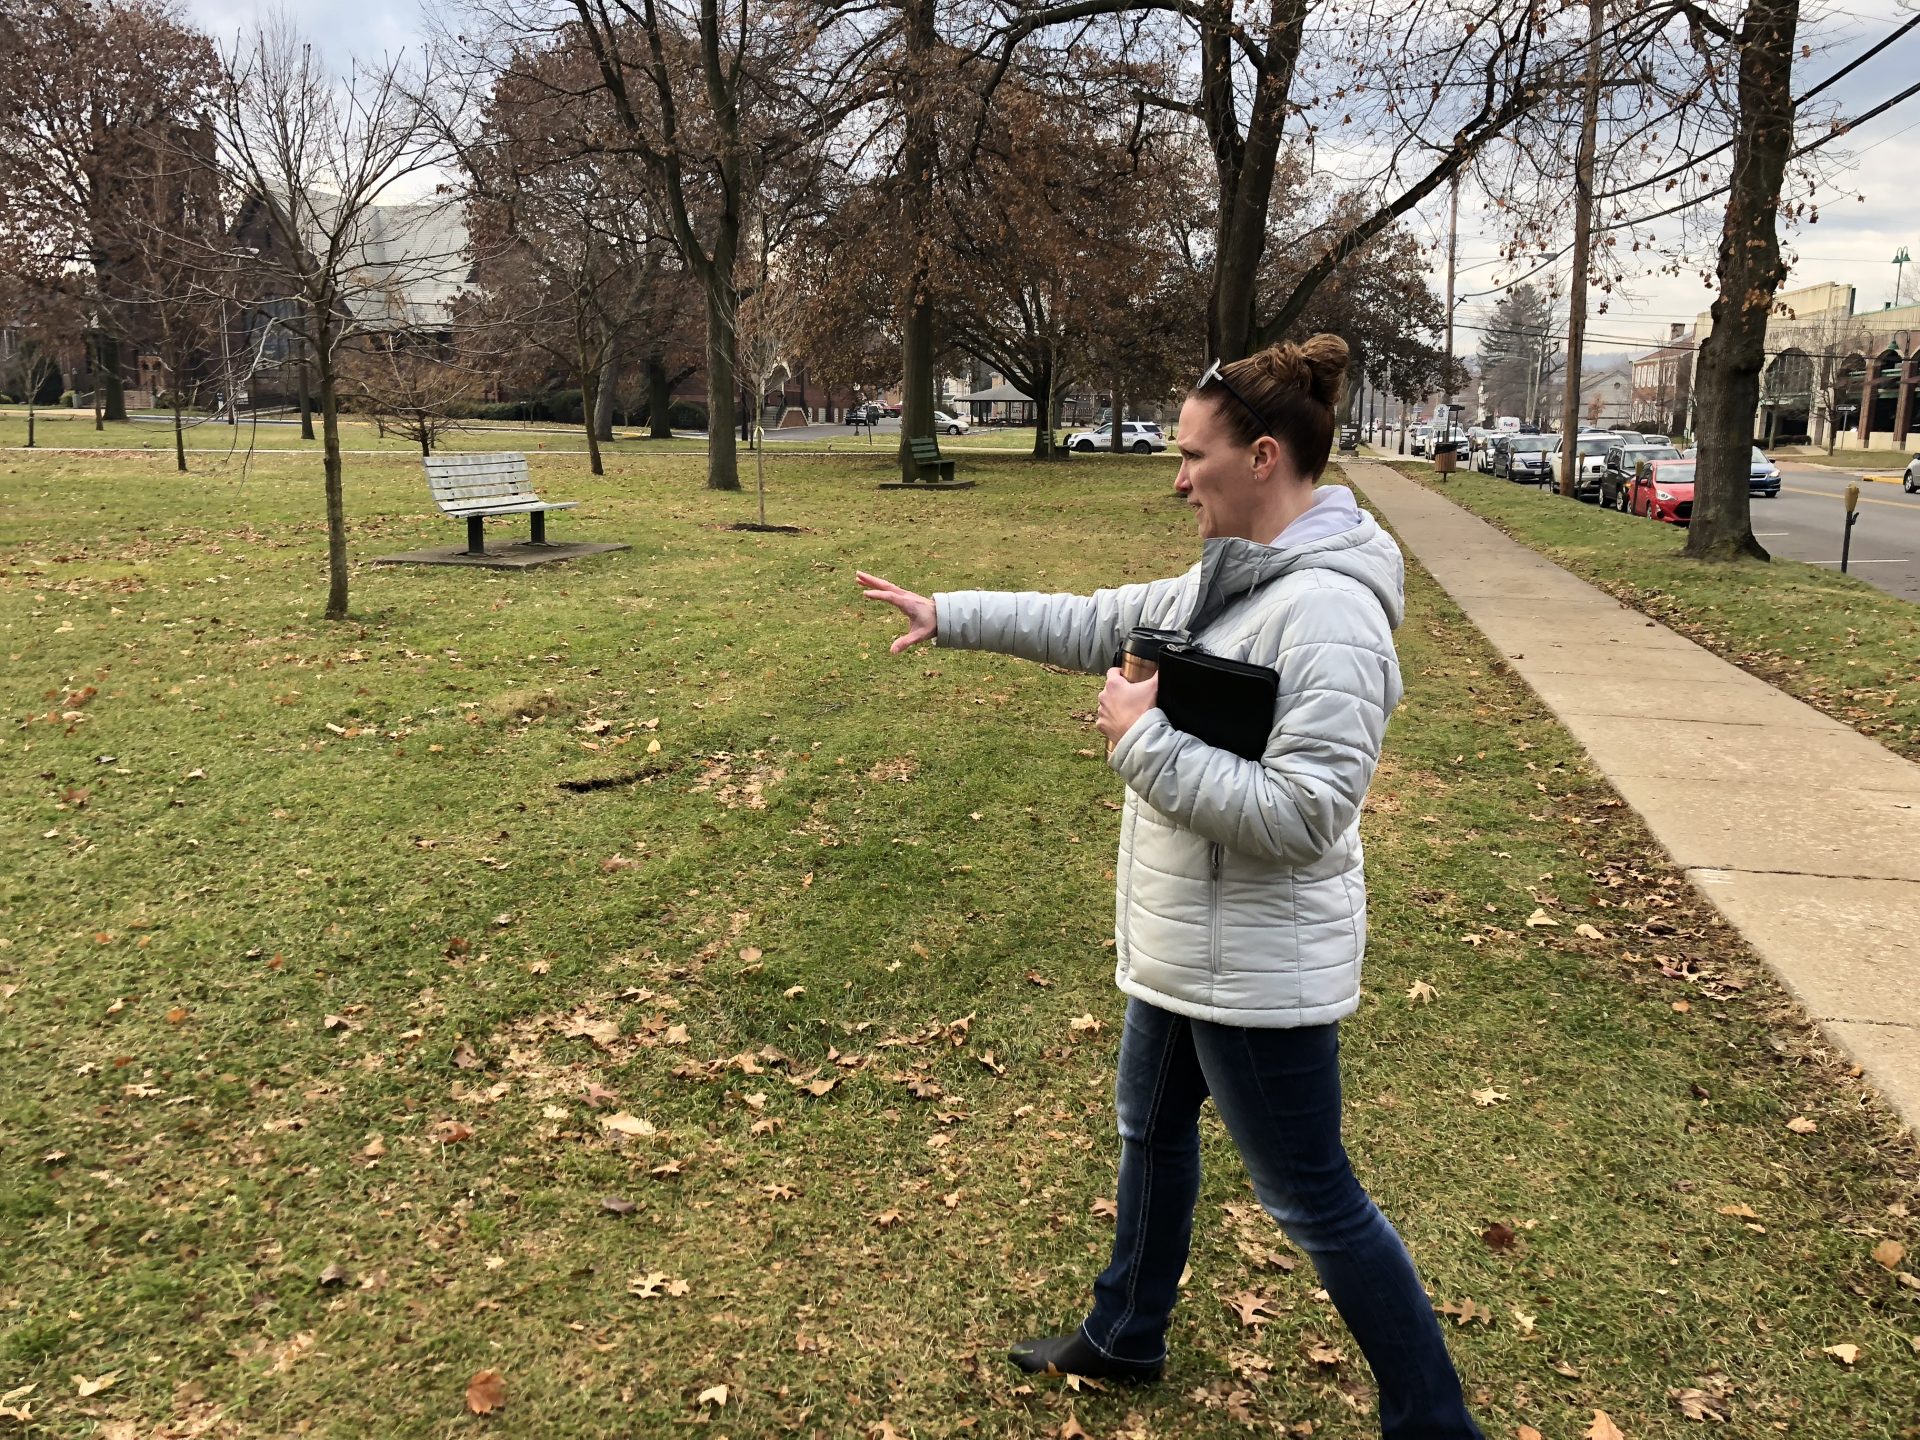 Jessica Davis on Dec. 14, 2018, shows a spot in Beaver County where she and others hope to build a memorial to soldiers killed in the Global War on Terror.